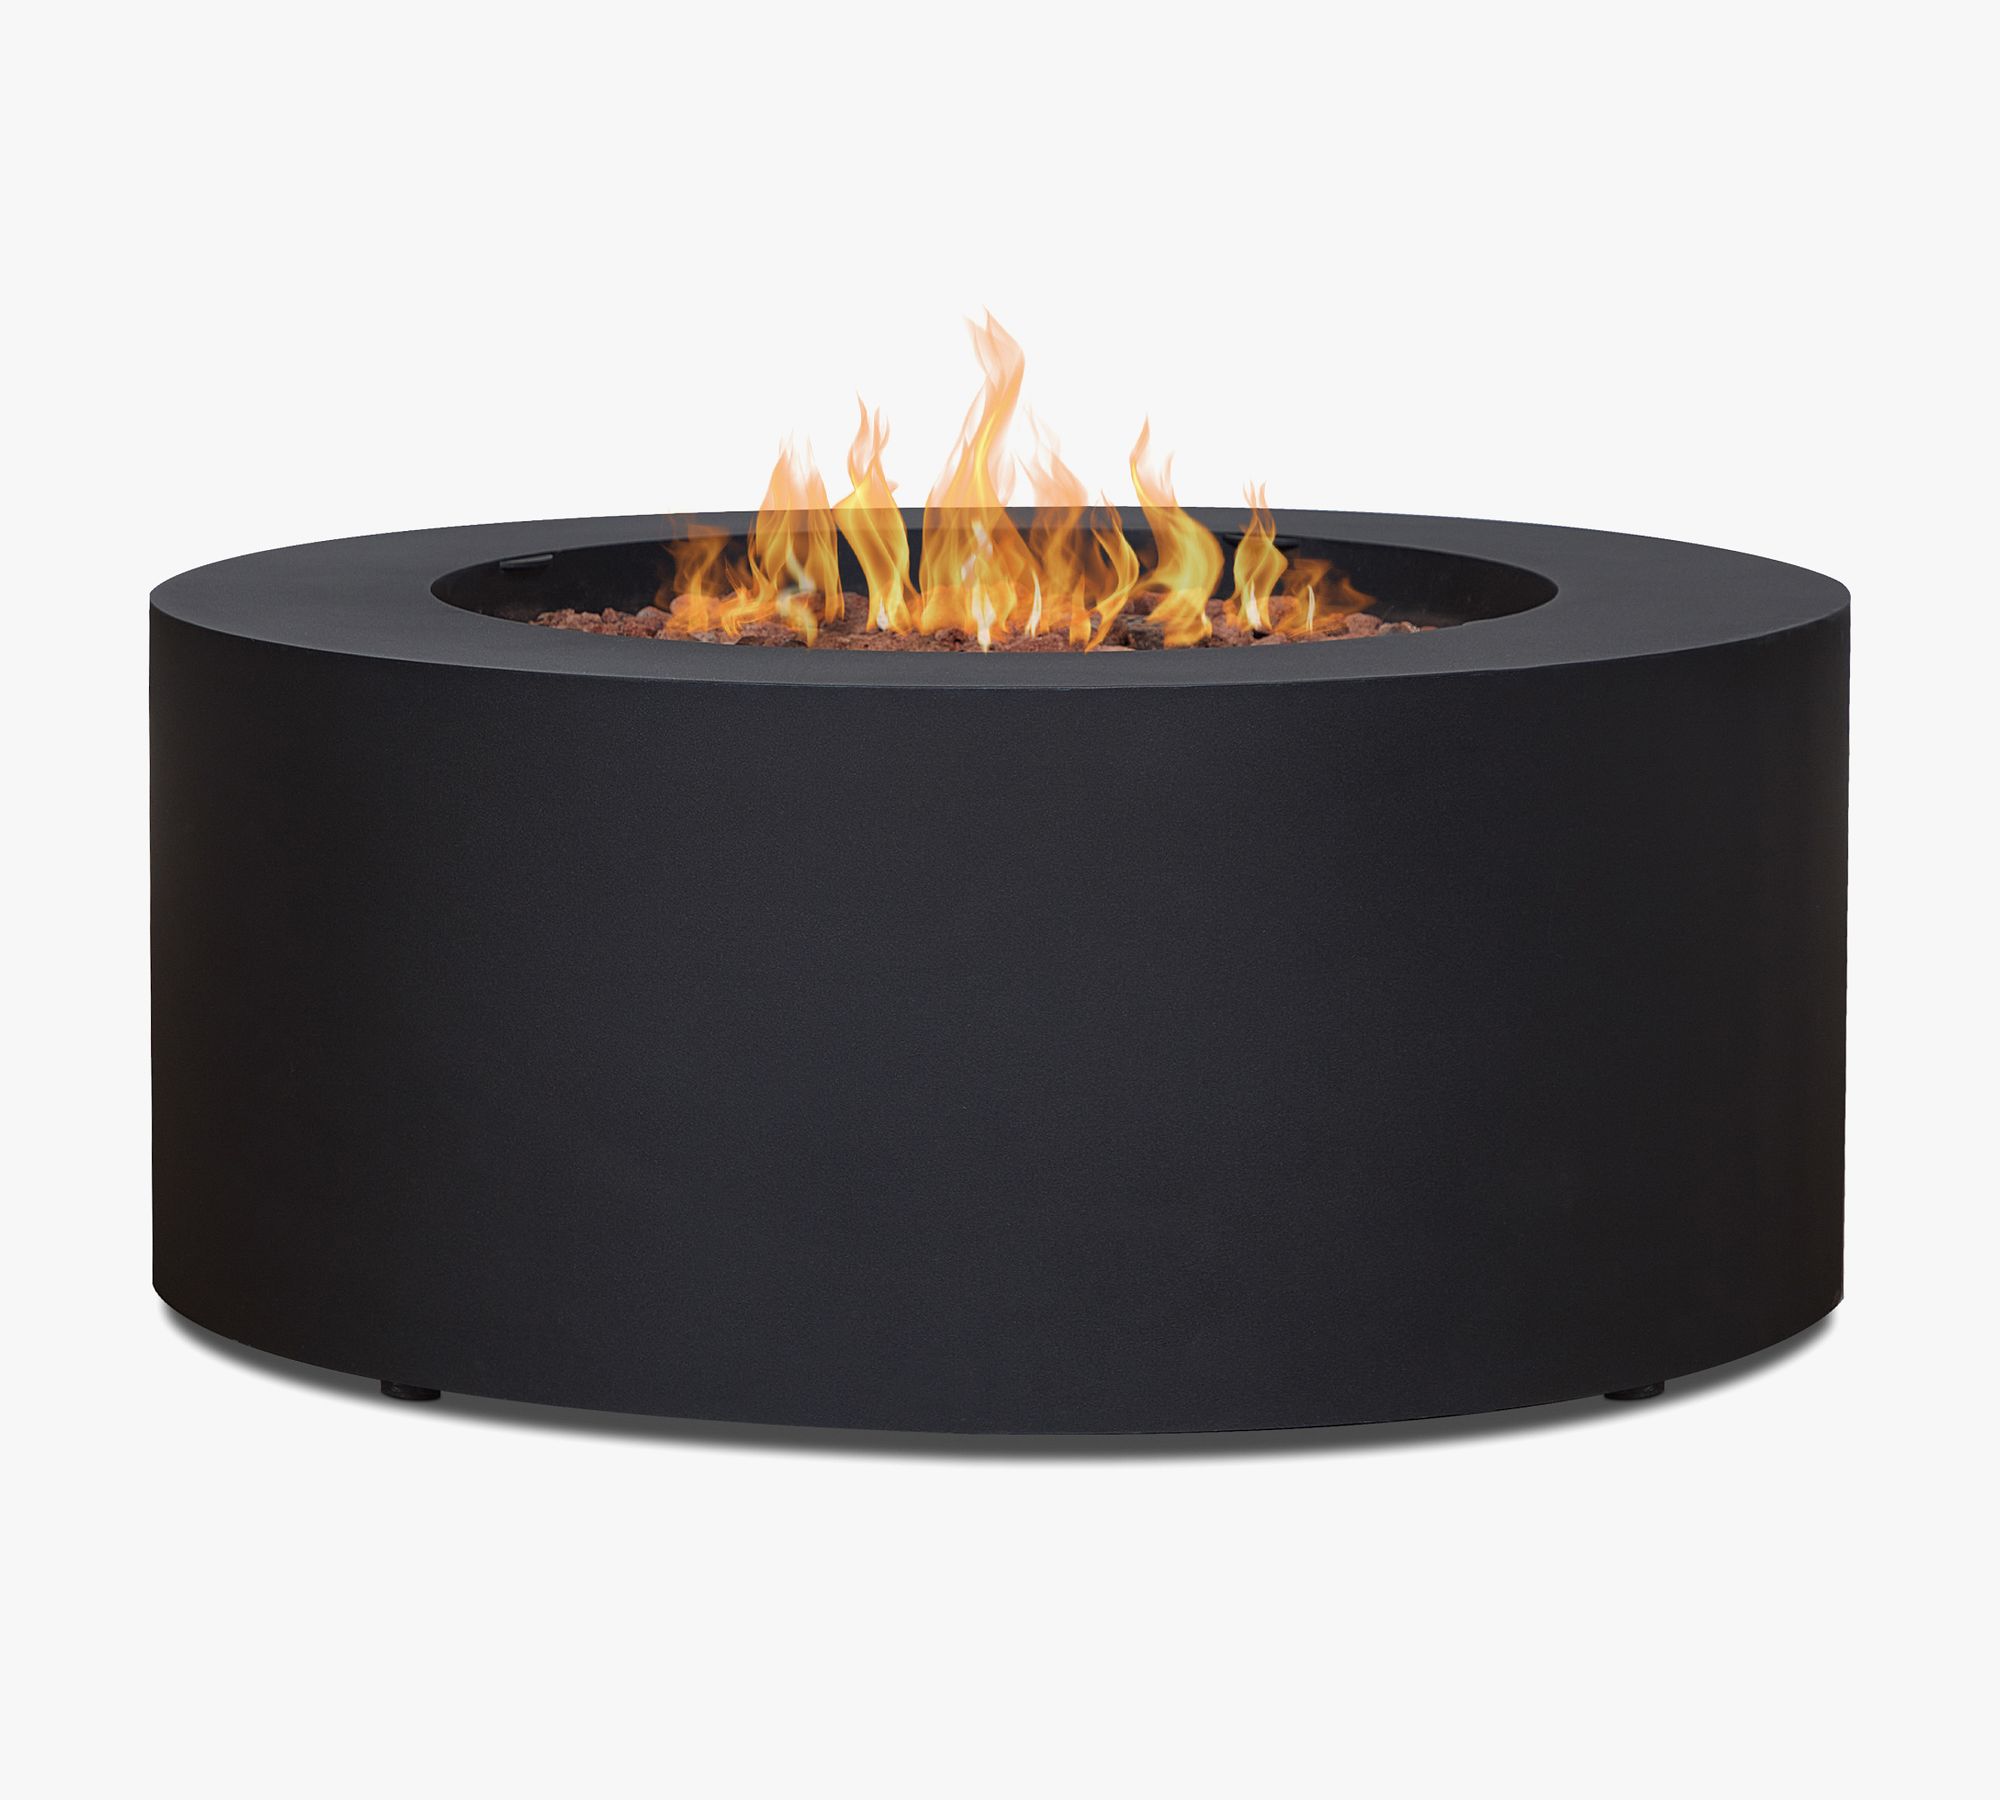 Burrows 36" Round Propane Fire Pit Table